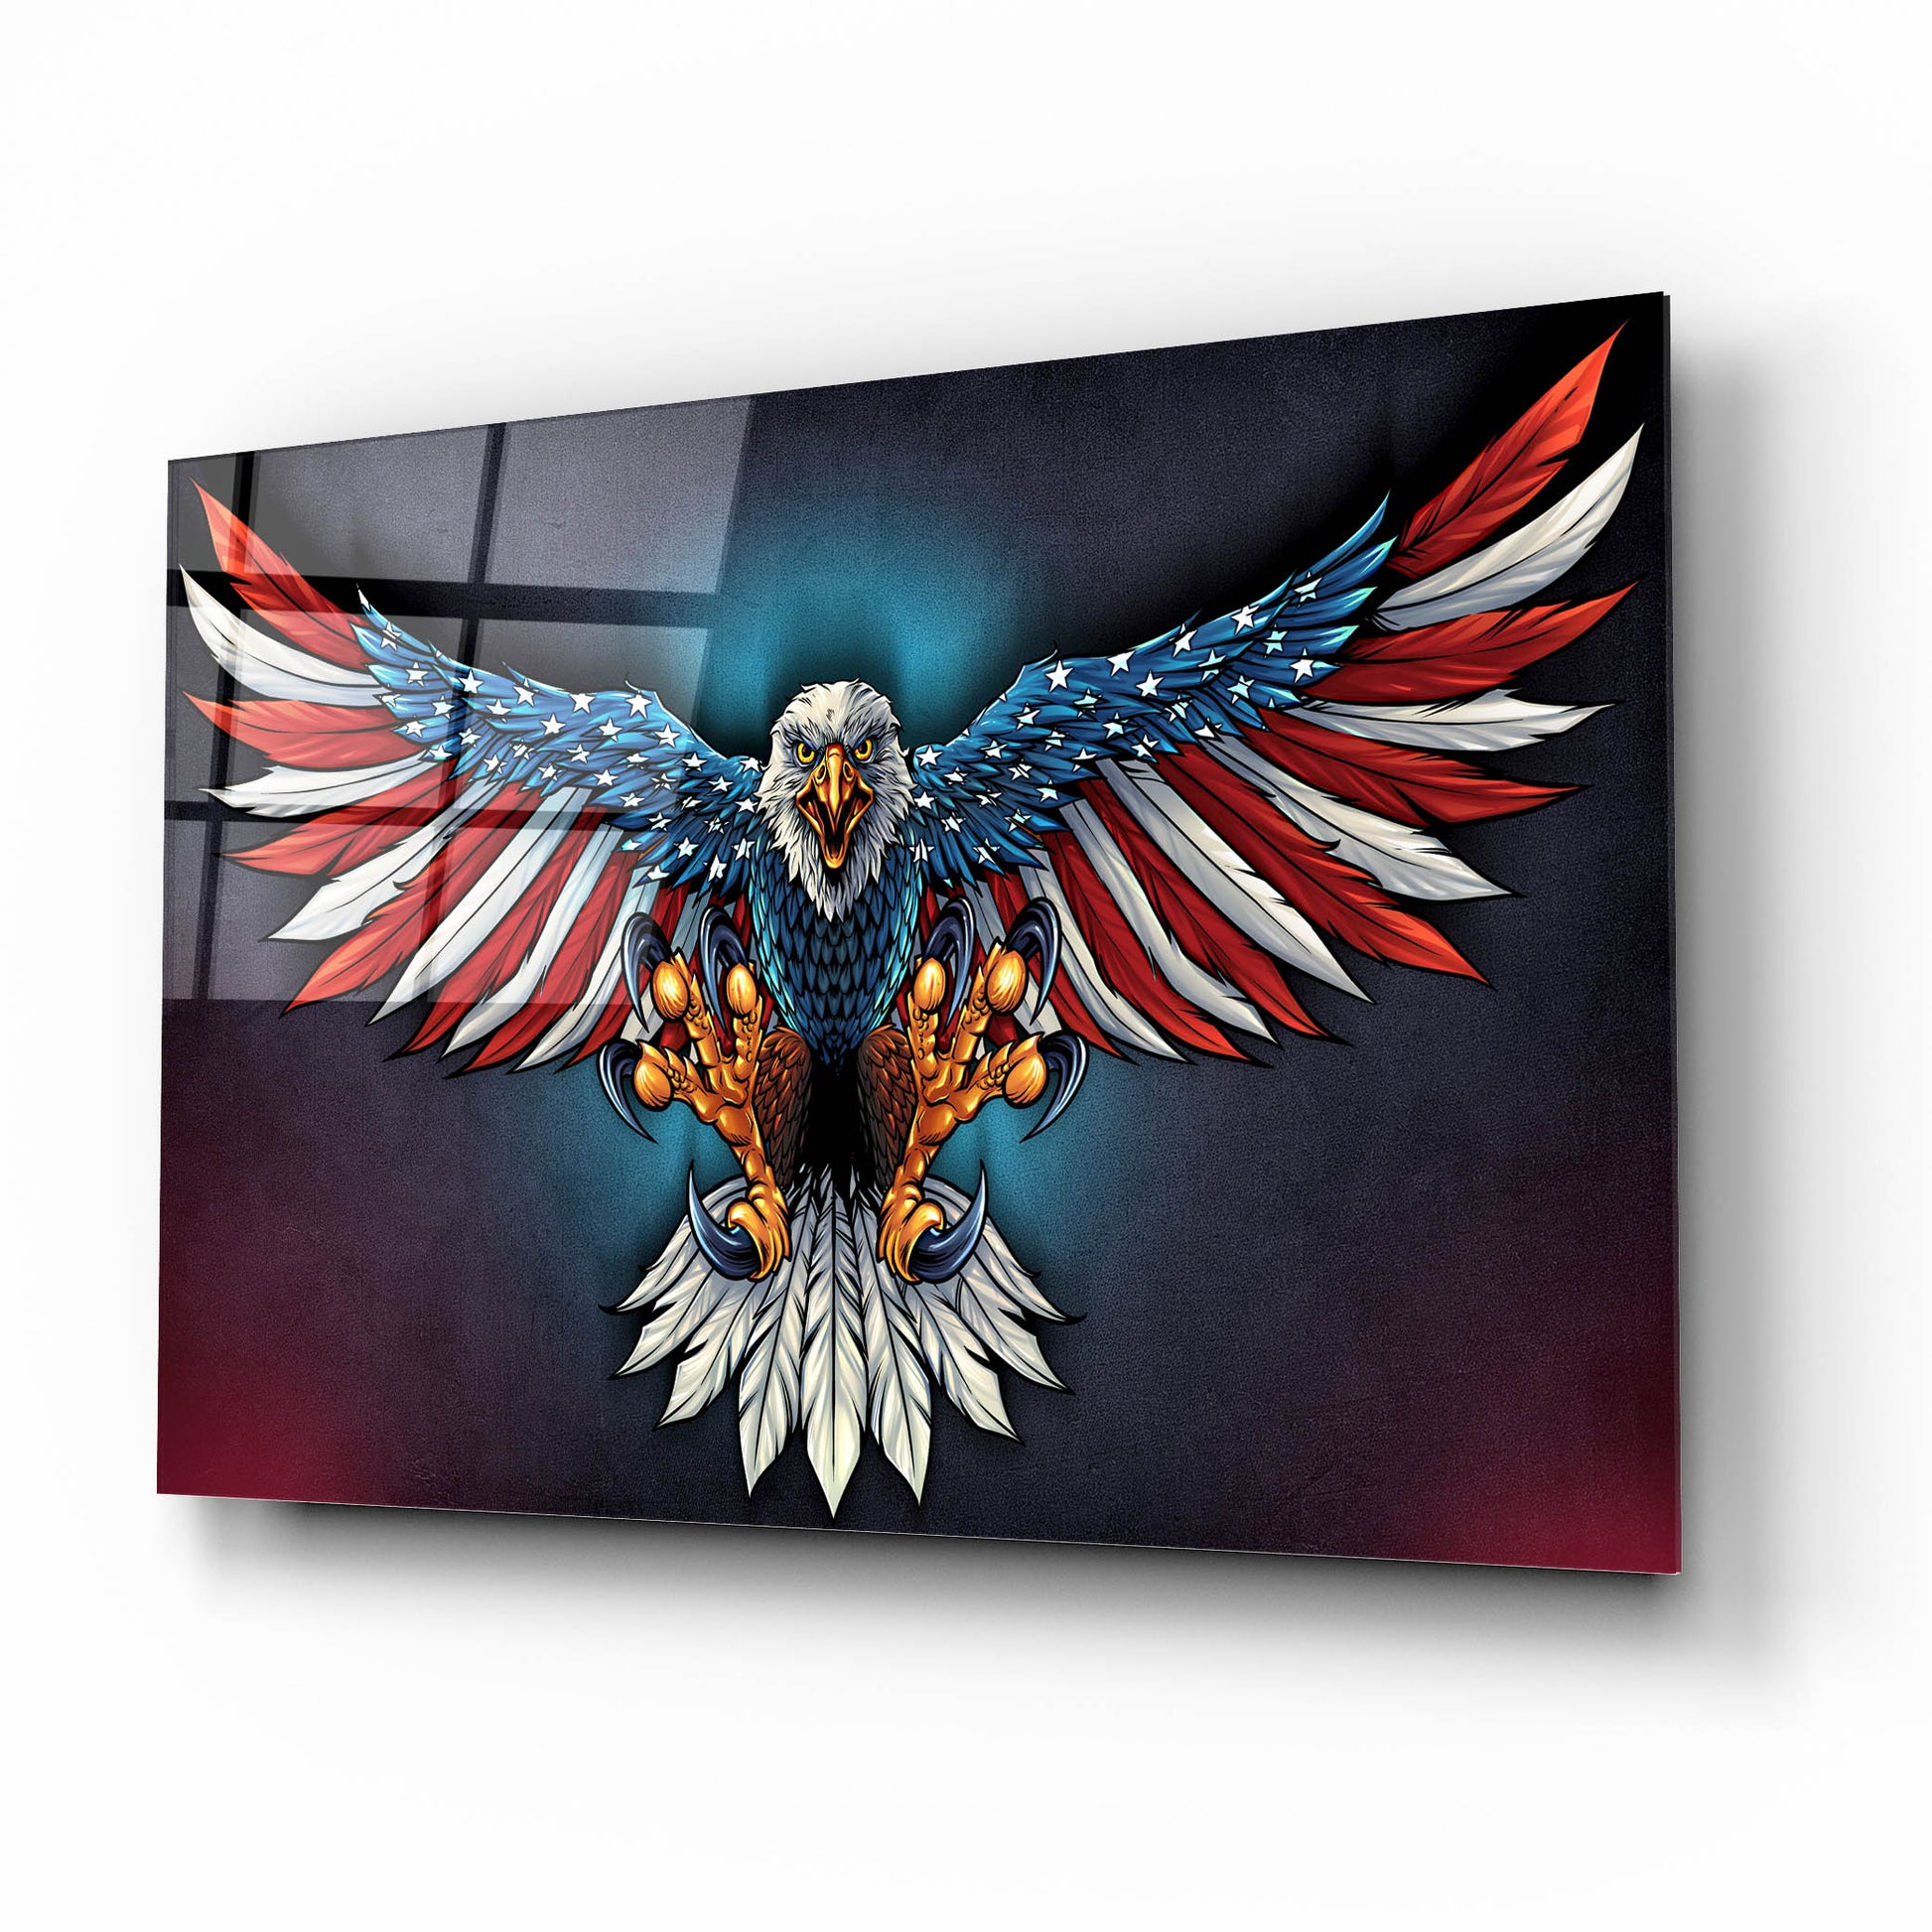 Epic Art 'Eagle With US Flag Wings Spread' by Flyland Designs, Acrylic Glass Wall Art,16x12